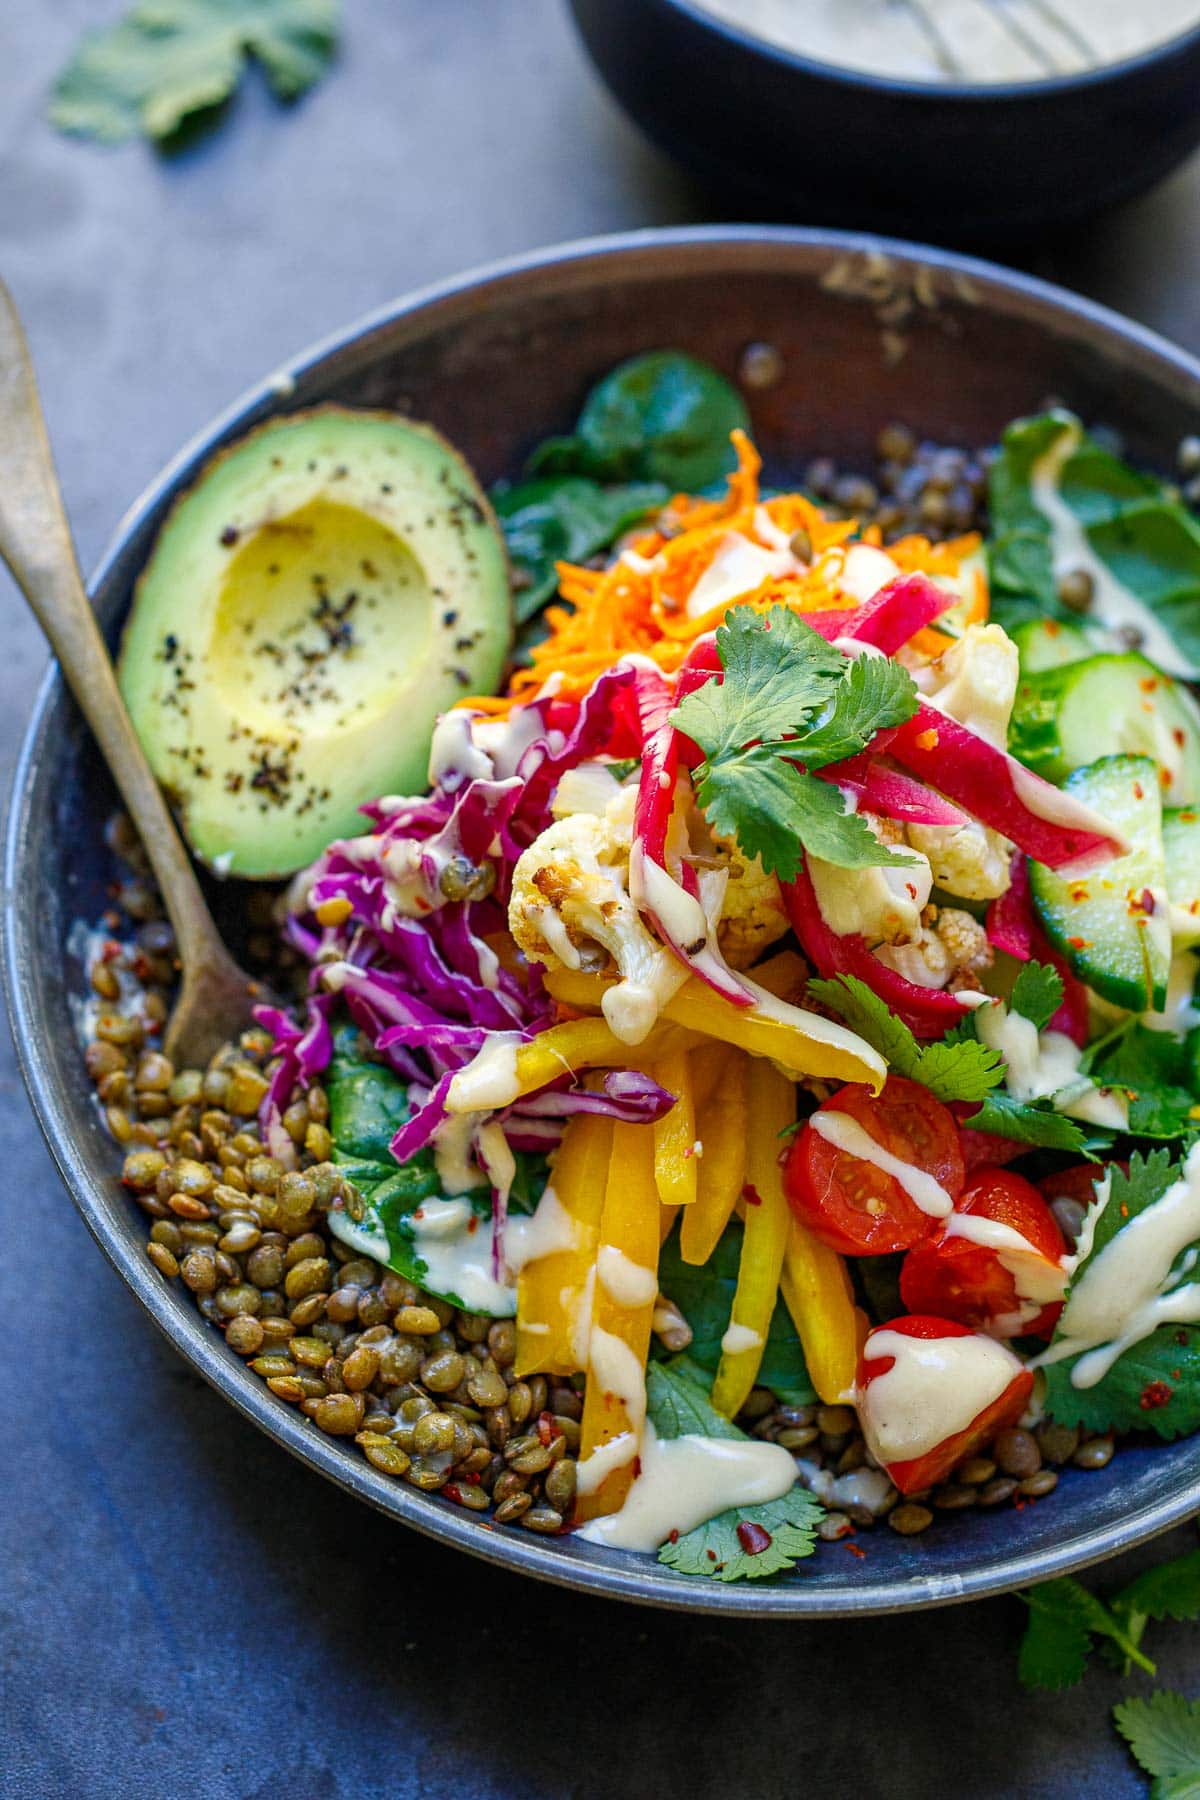 Making the switch to a plant-based diet? These delicious plant-based recipes will make this process fun and easy! Whether it's dinner, lunch or breakfast, we have you covered! 